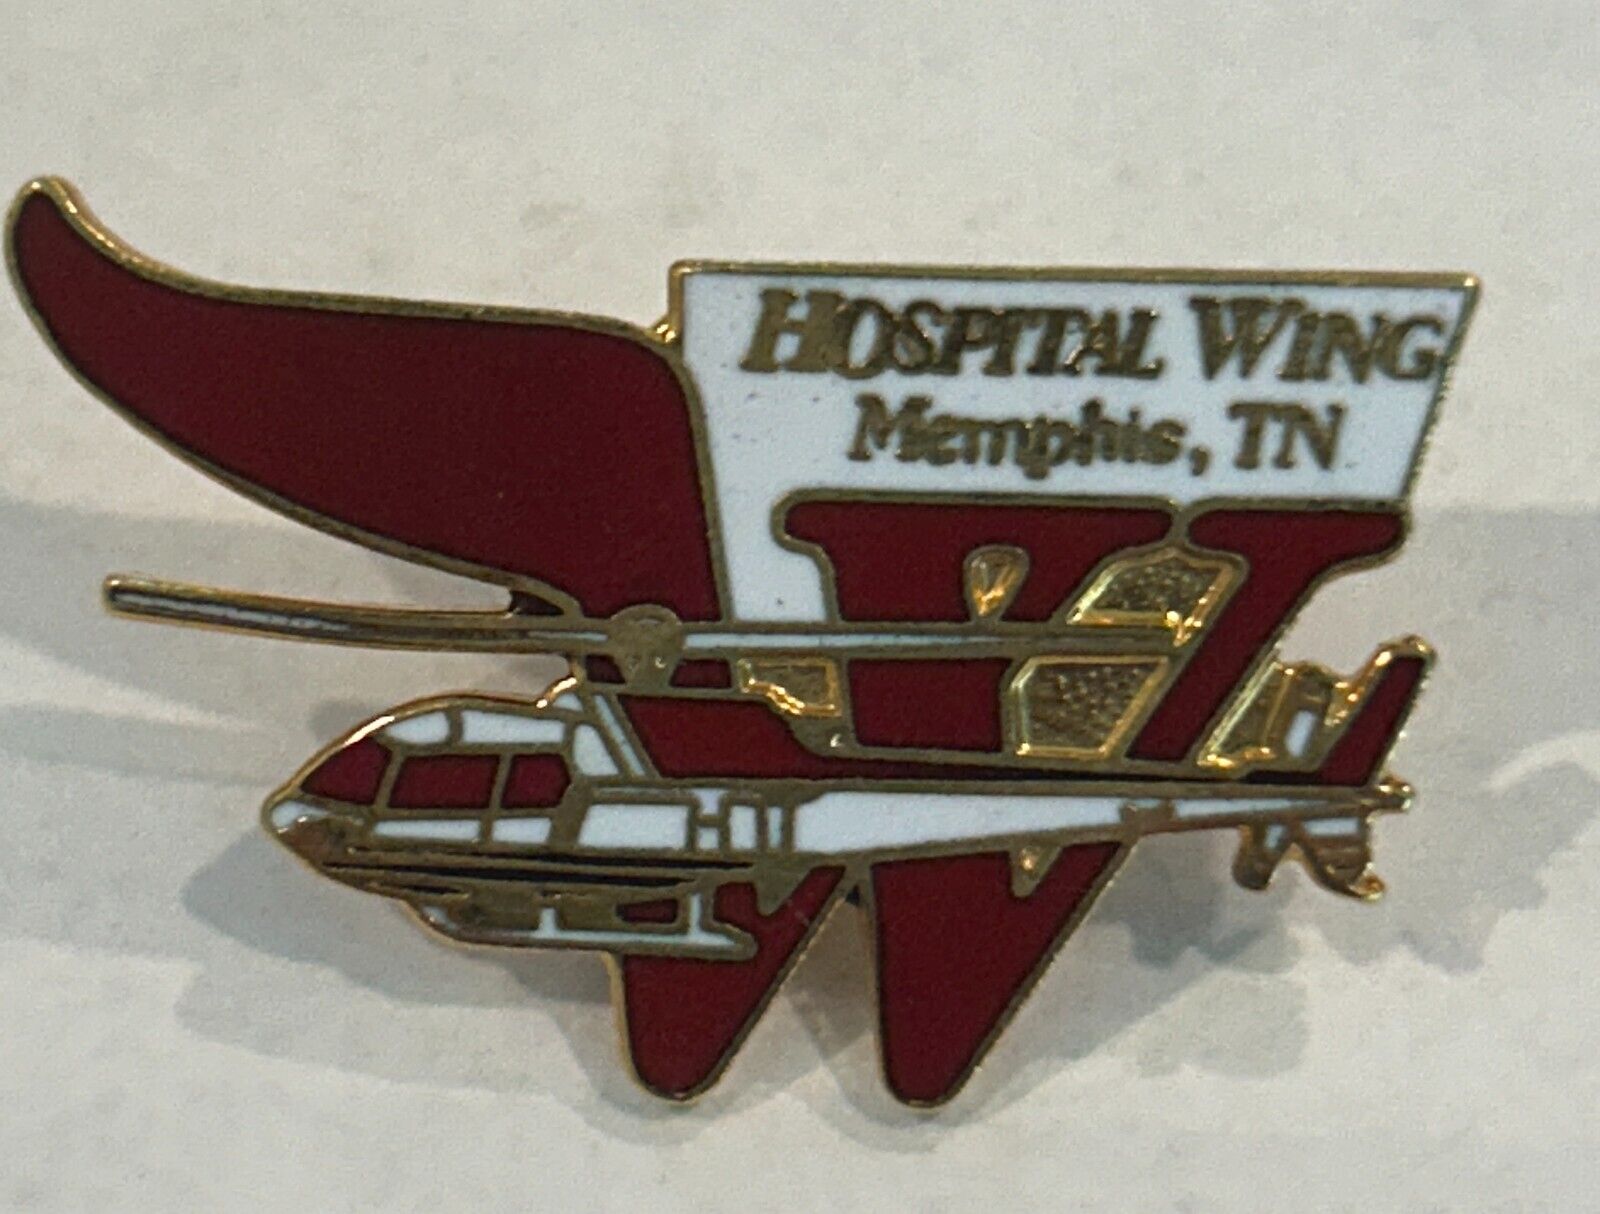 Hospital Wing Memphis, TN Helicopter Collector Pin